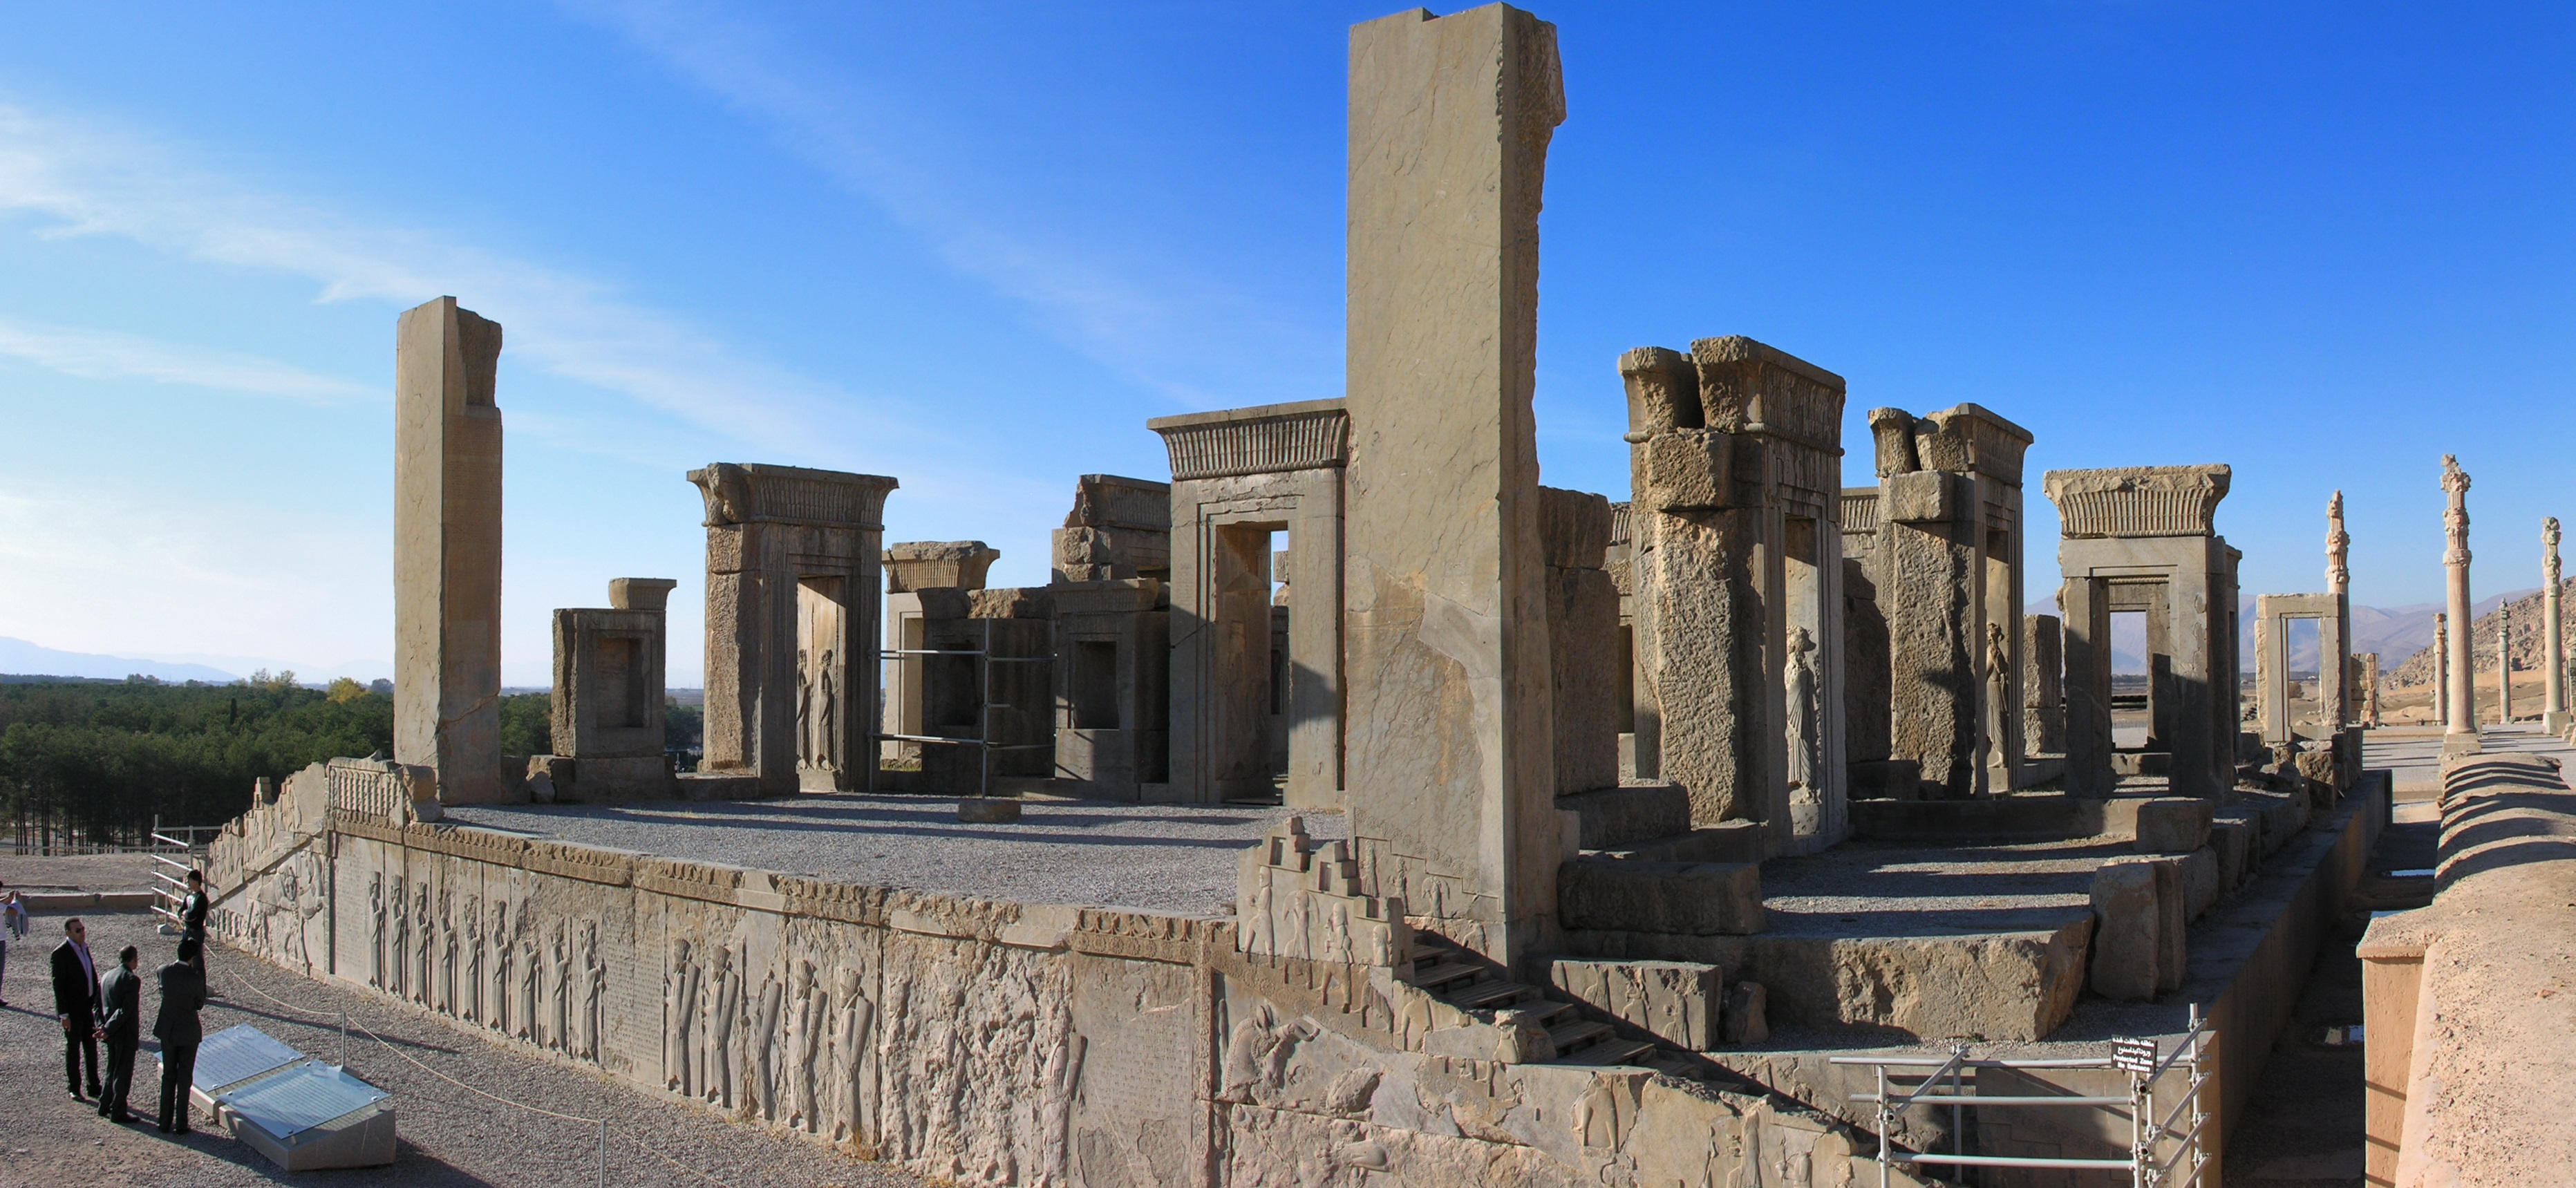 Images of Persepolis | 3727x1719